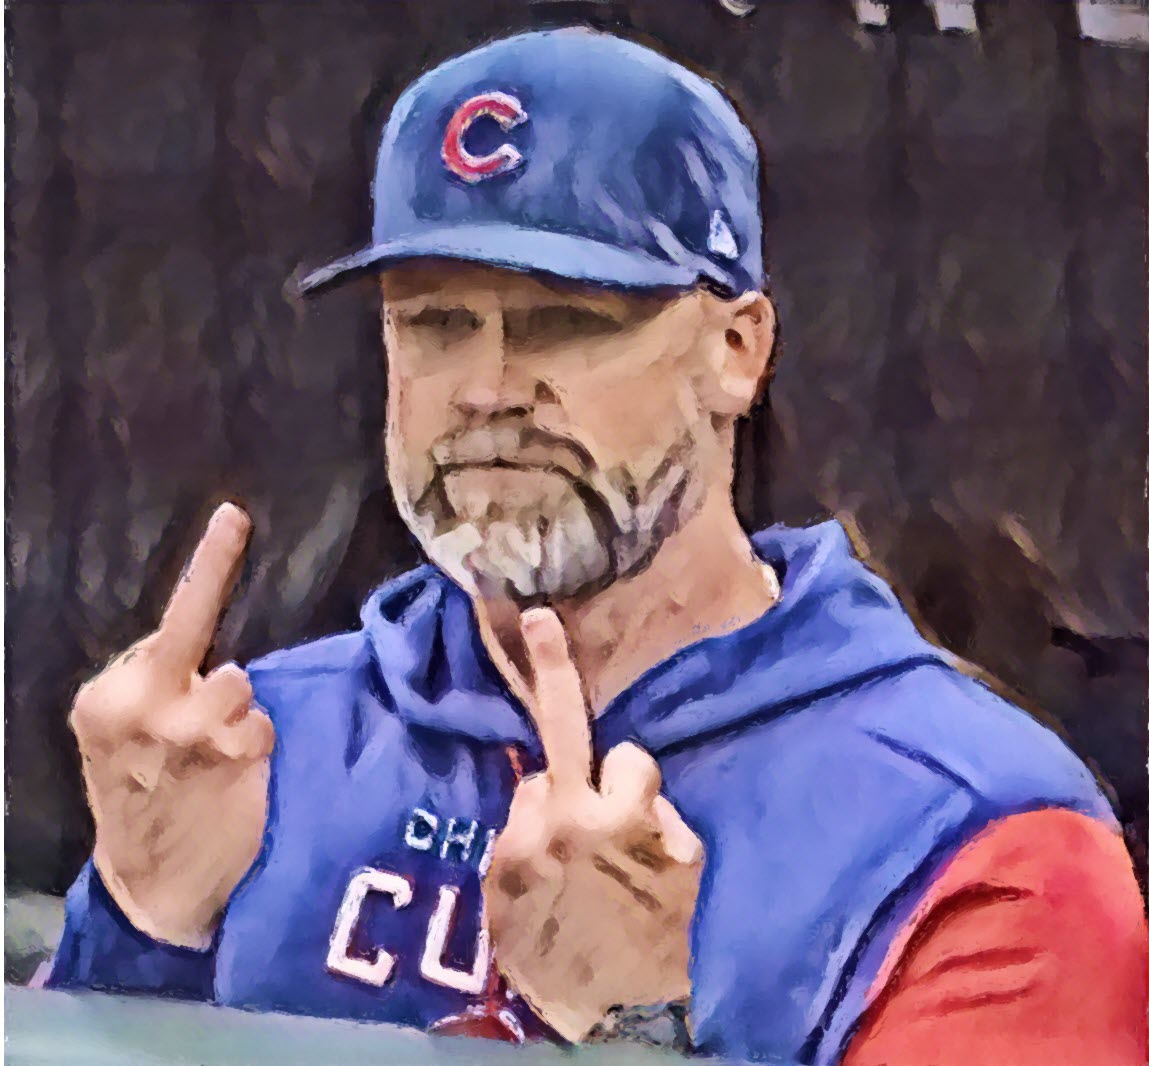 This bullpen is ridiculous. Nothing against Craig Consell, but the Cubs might have been better off keeping David Ross and spending Counsell's big salary on pitching.